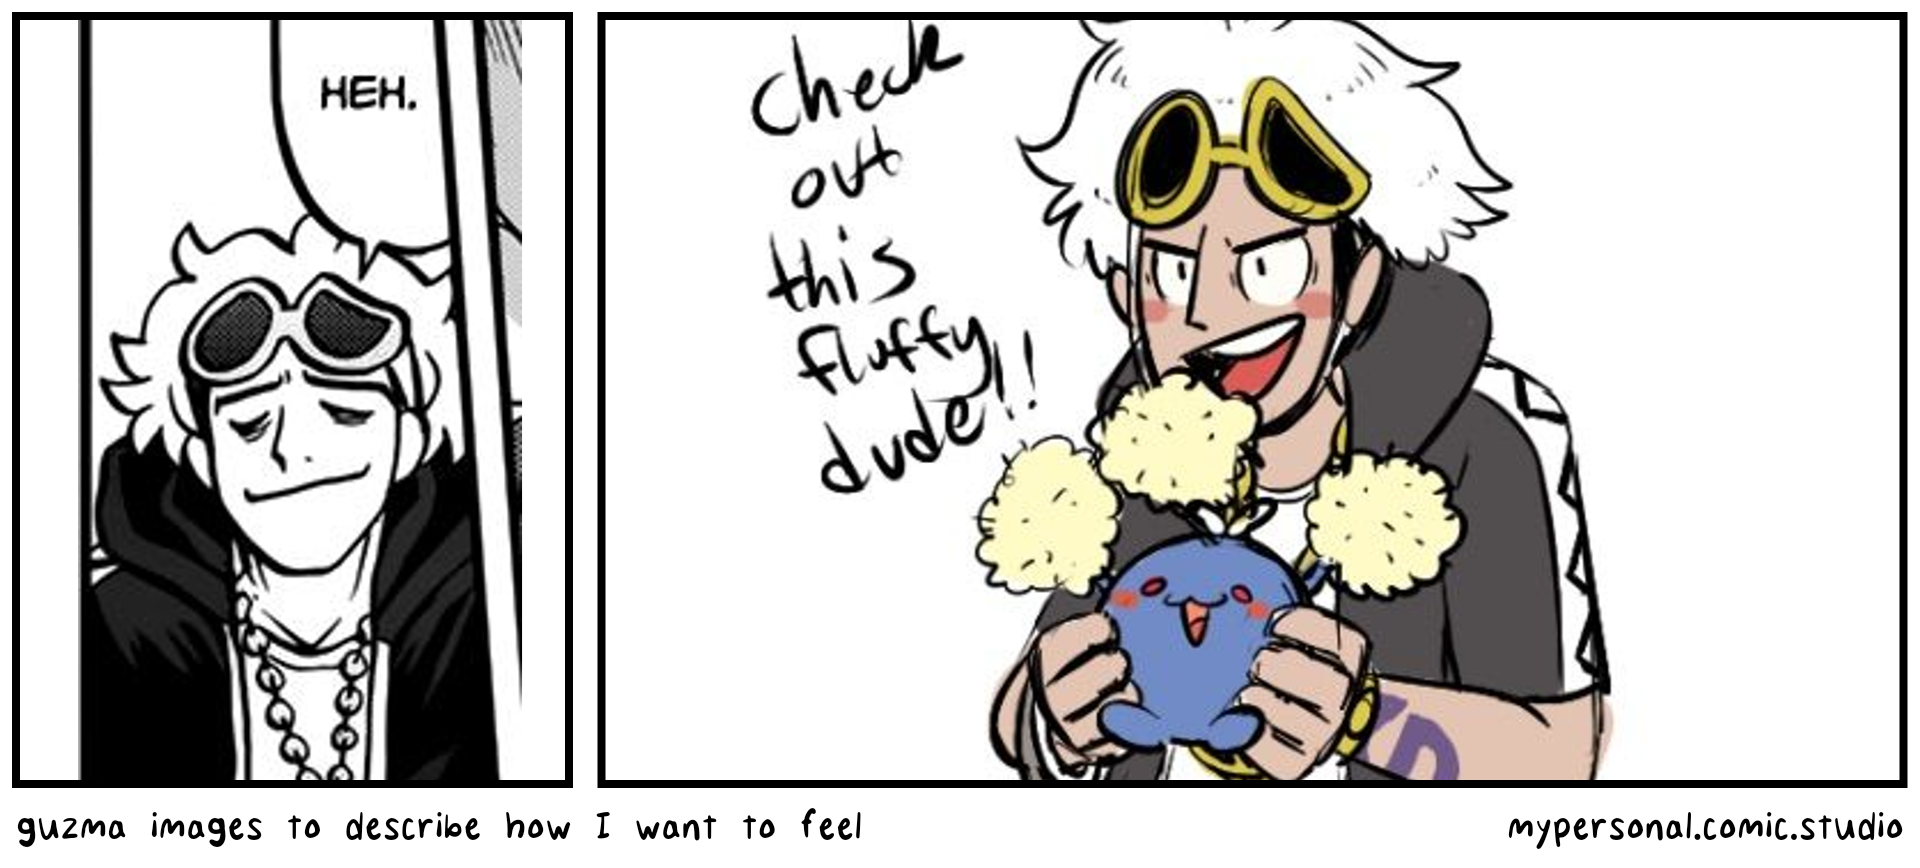 guzma images to describe how I want to feel